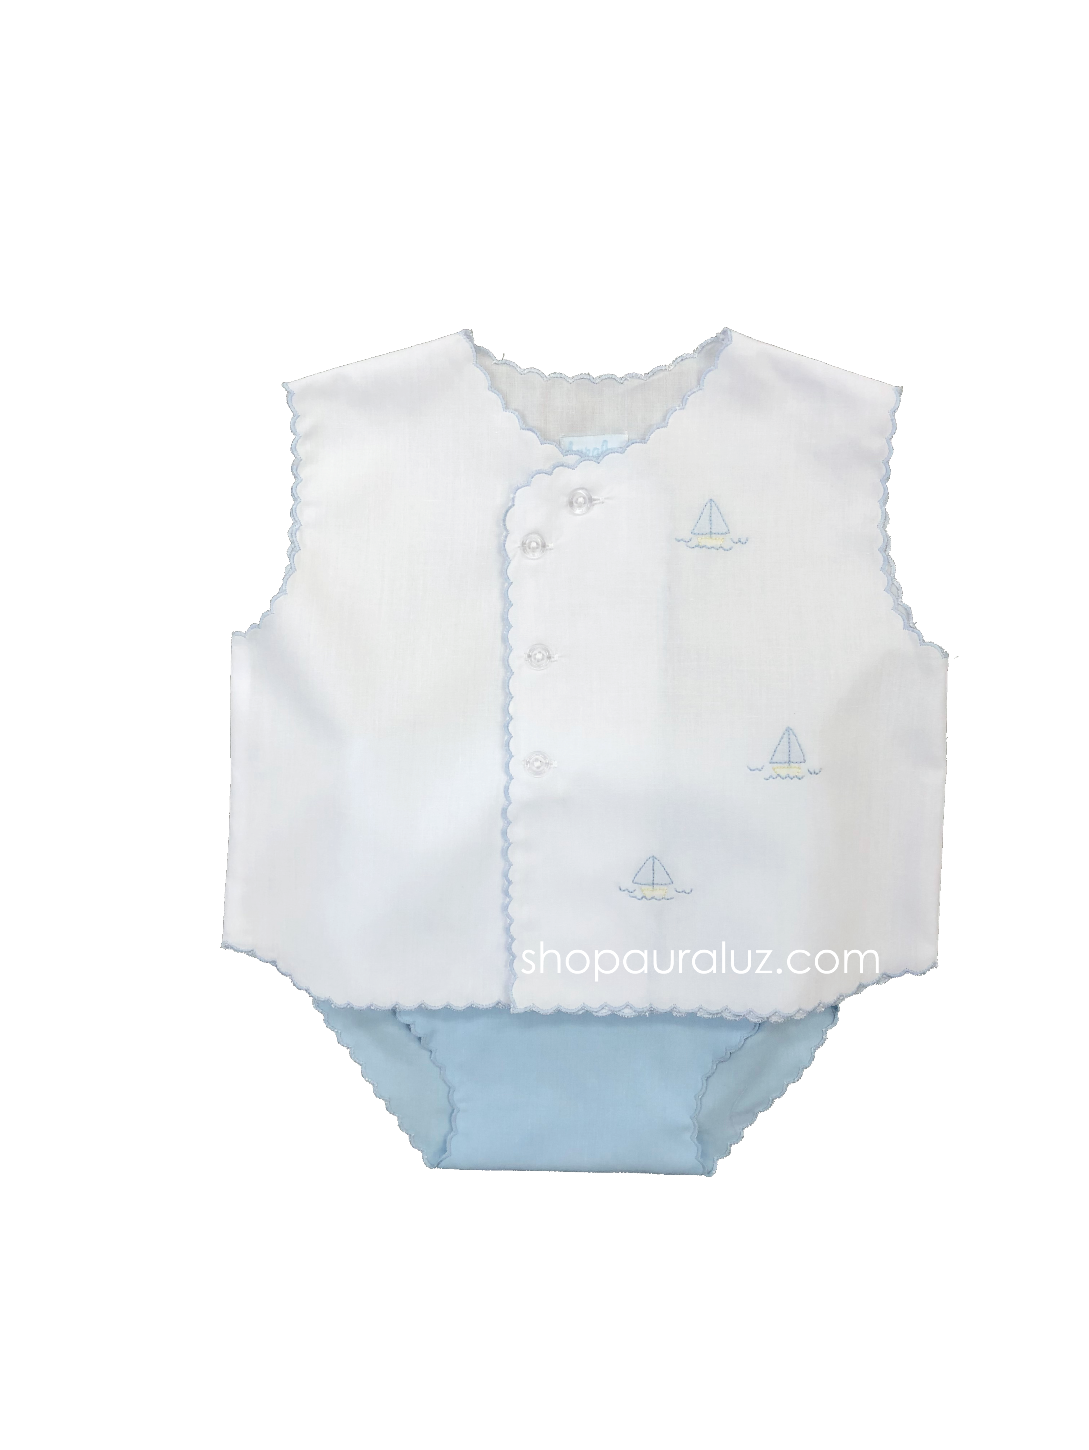 Auraluz Sleeveless Diaper shirt/cover set...White with blue scallops(blue diaper cover) and embroidered boats